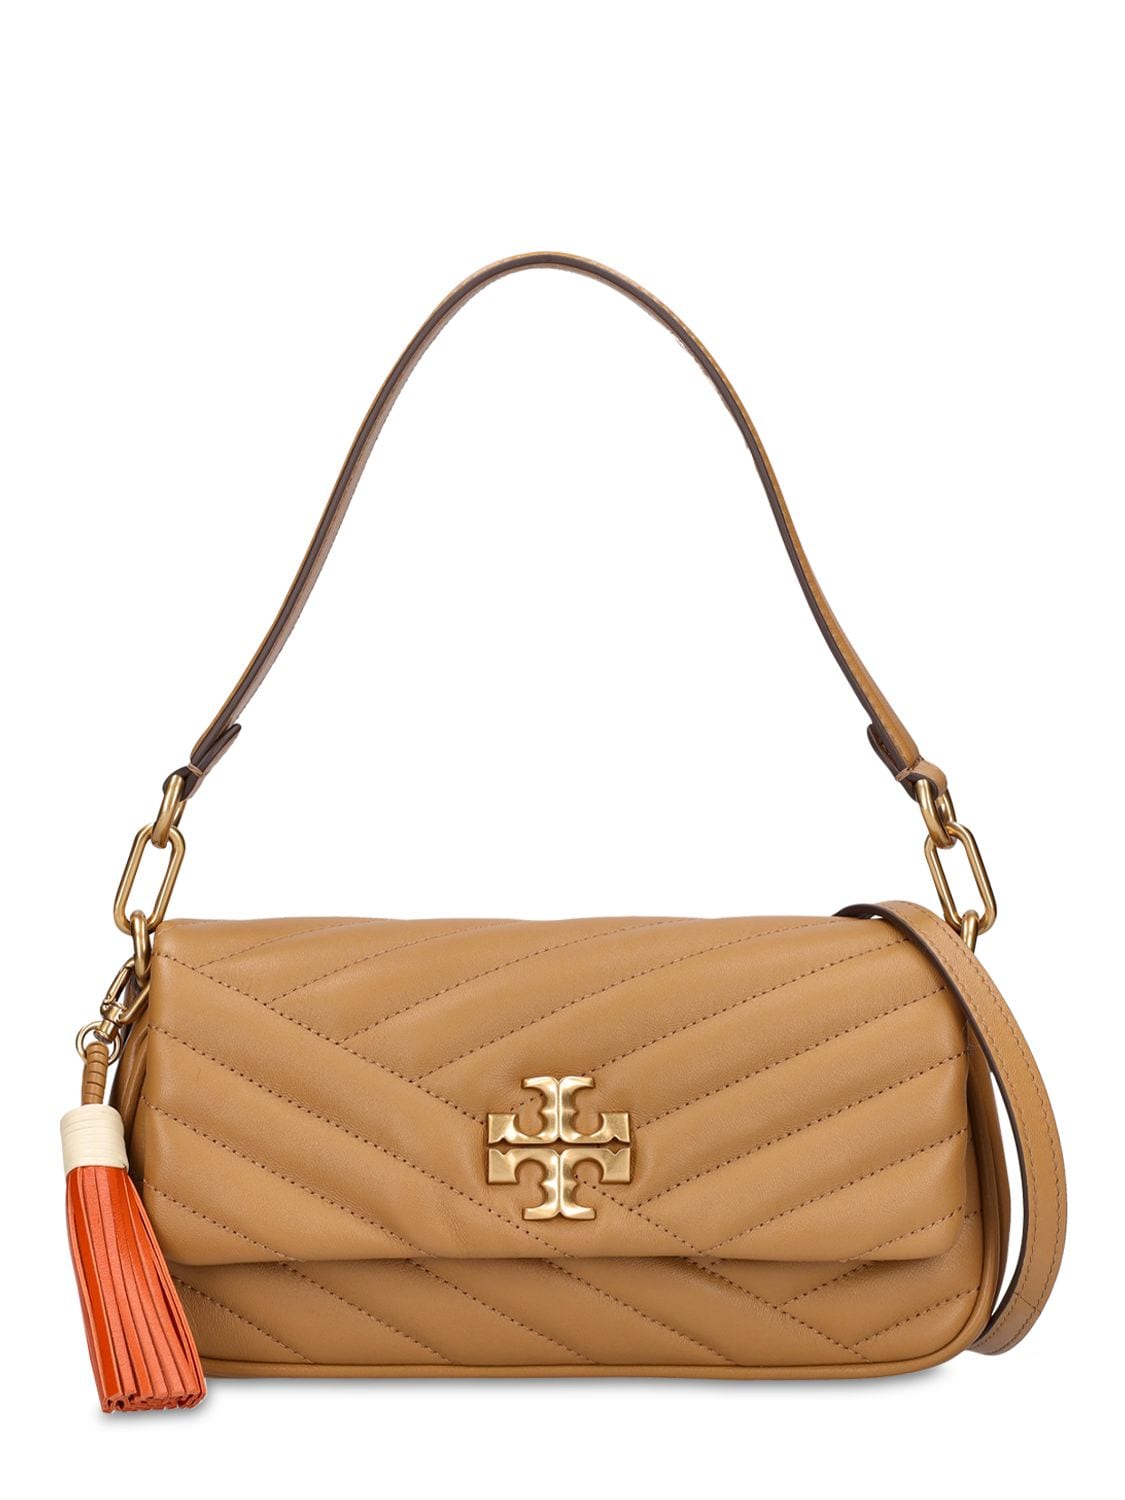 Tory Burch Small Kira Chevron Leather Shoulder Bag In Dusty Almond/rolled  Gold